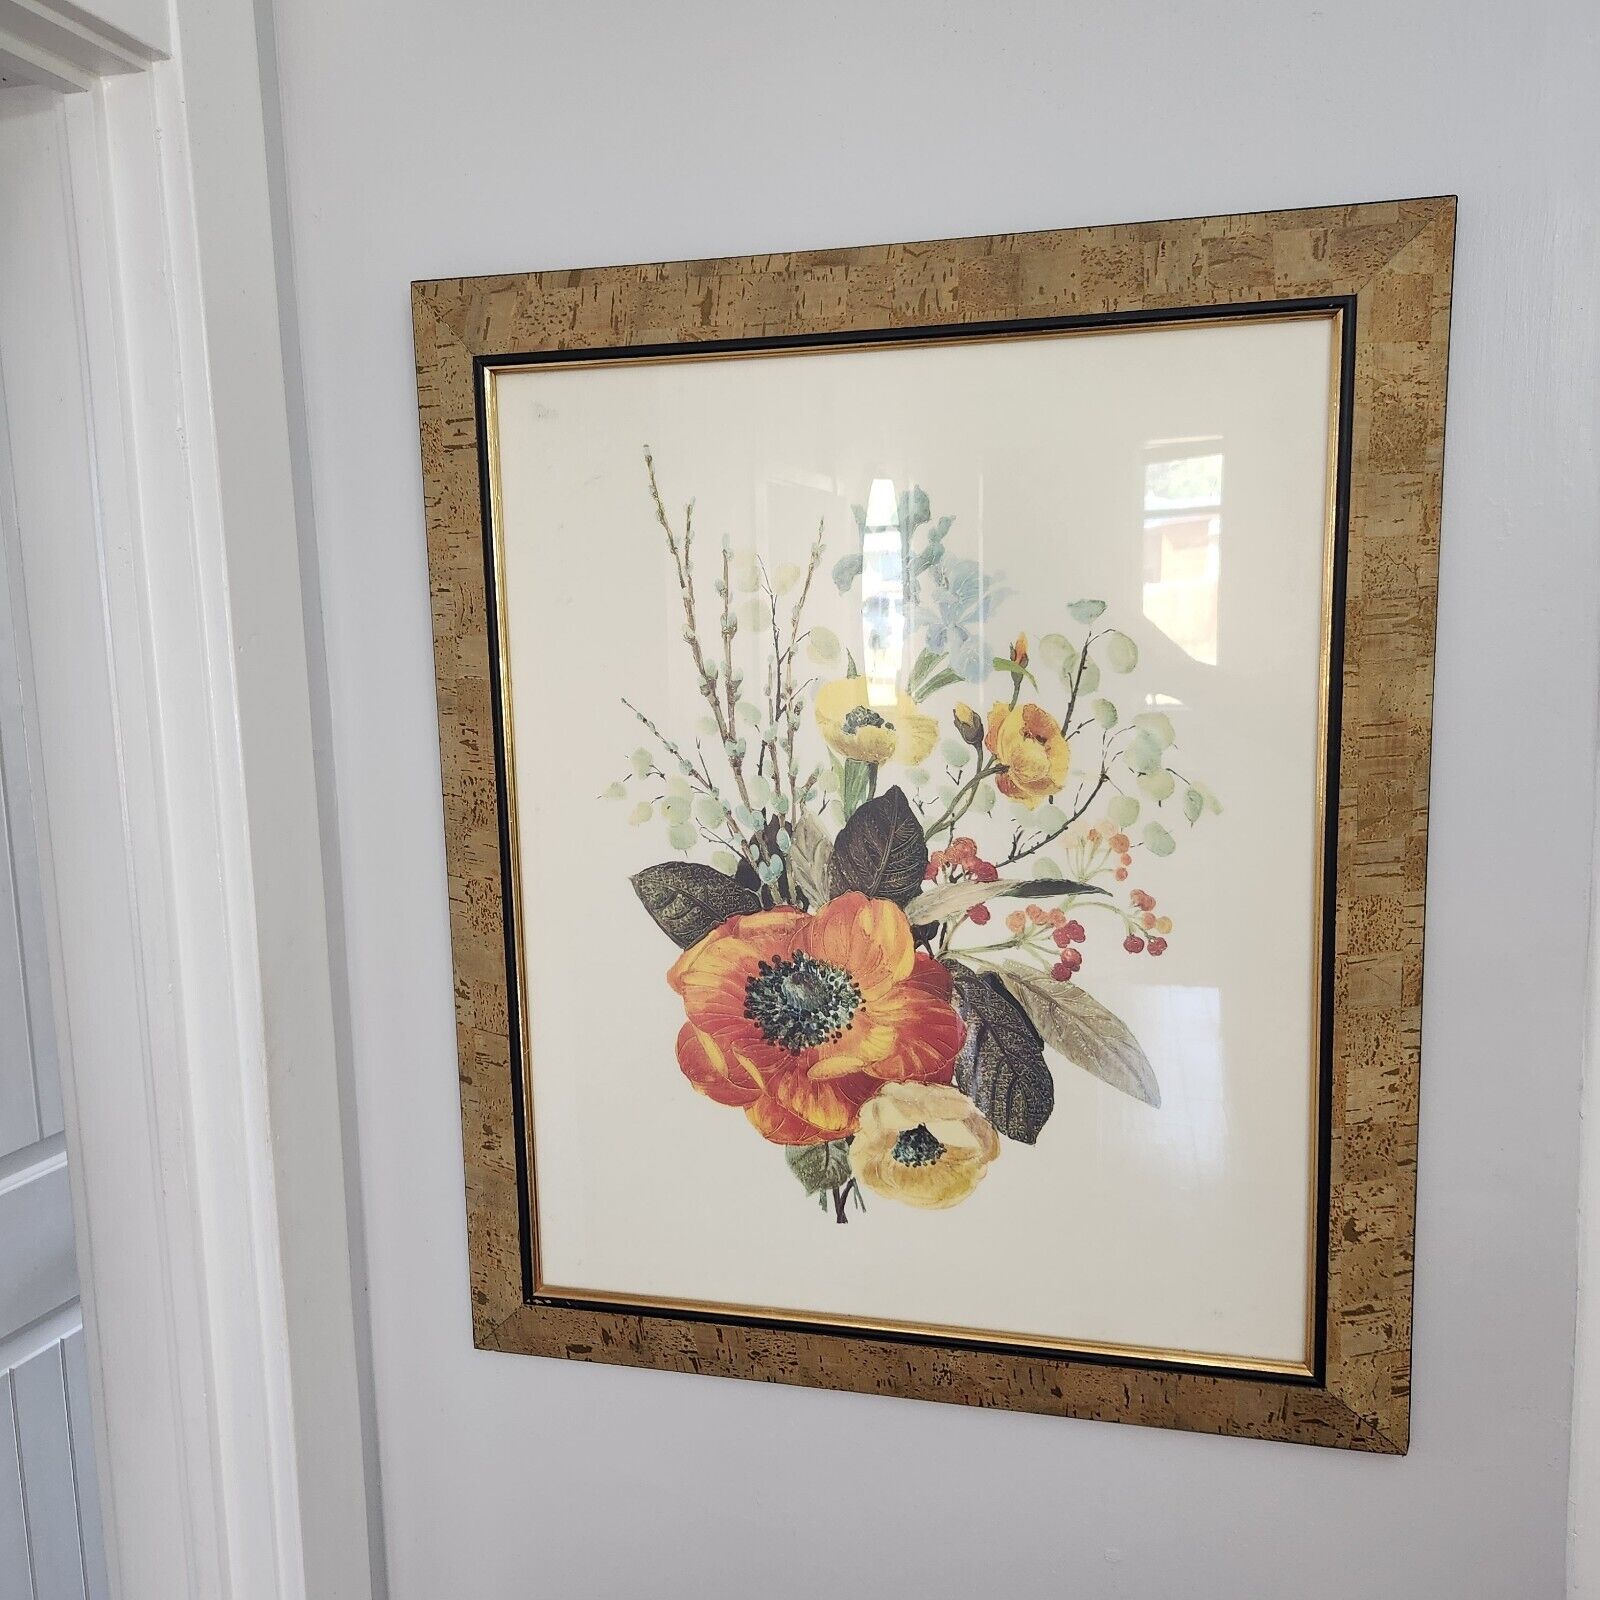 MCM Turner Wall Accessory Art Floral Cork Frame Magnificence 27x31 Mid Century